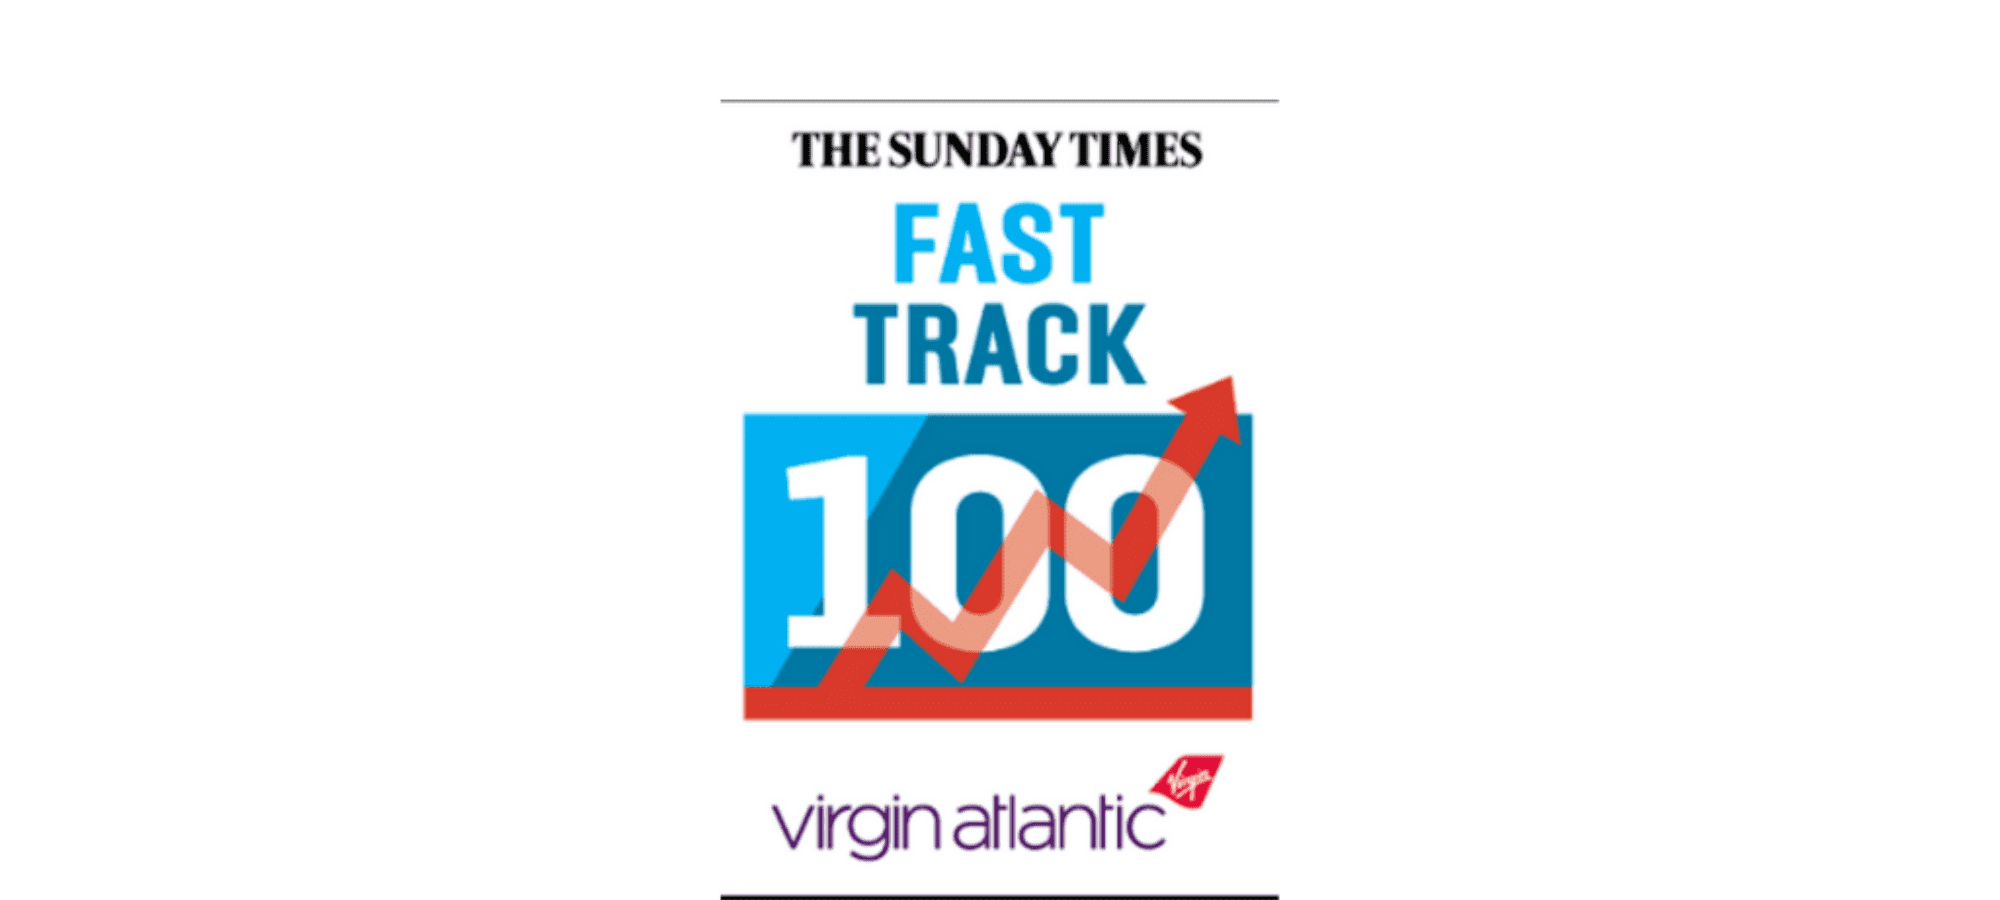 The Sunday Times Fast Track 100